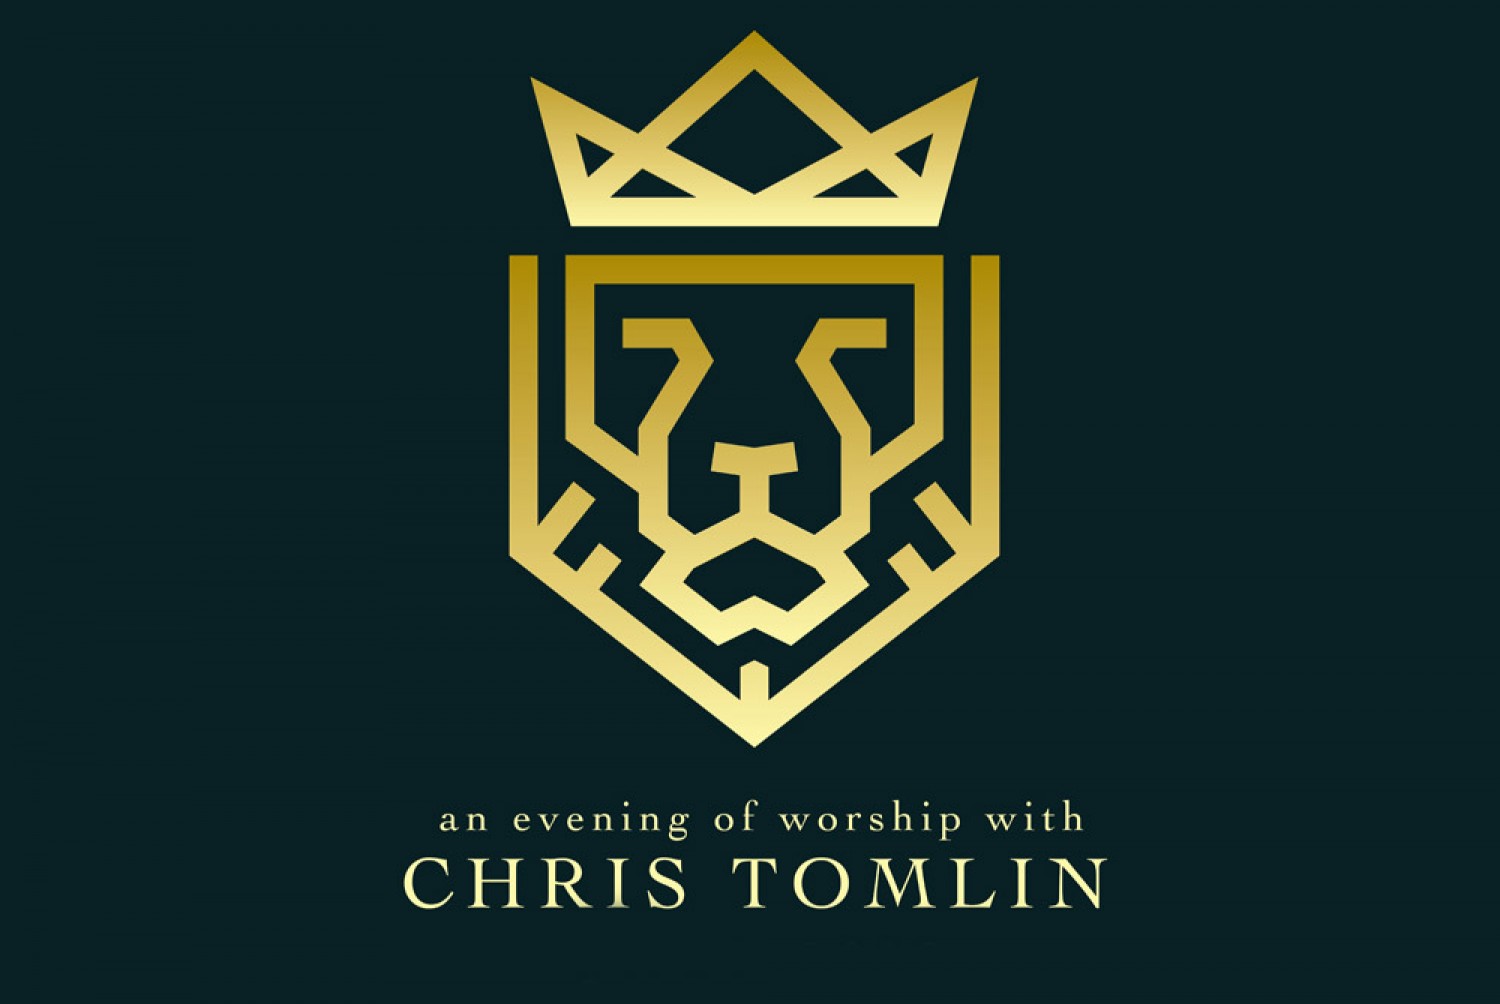 An Evening of Worship with Chris Tomlin @ EKU Center for the Arts